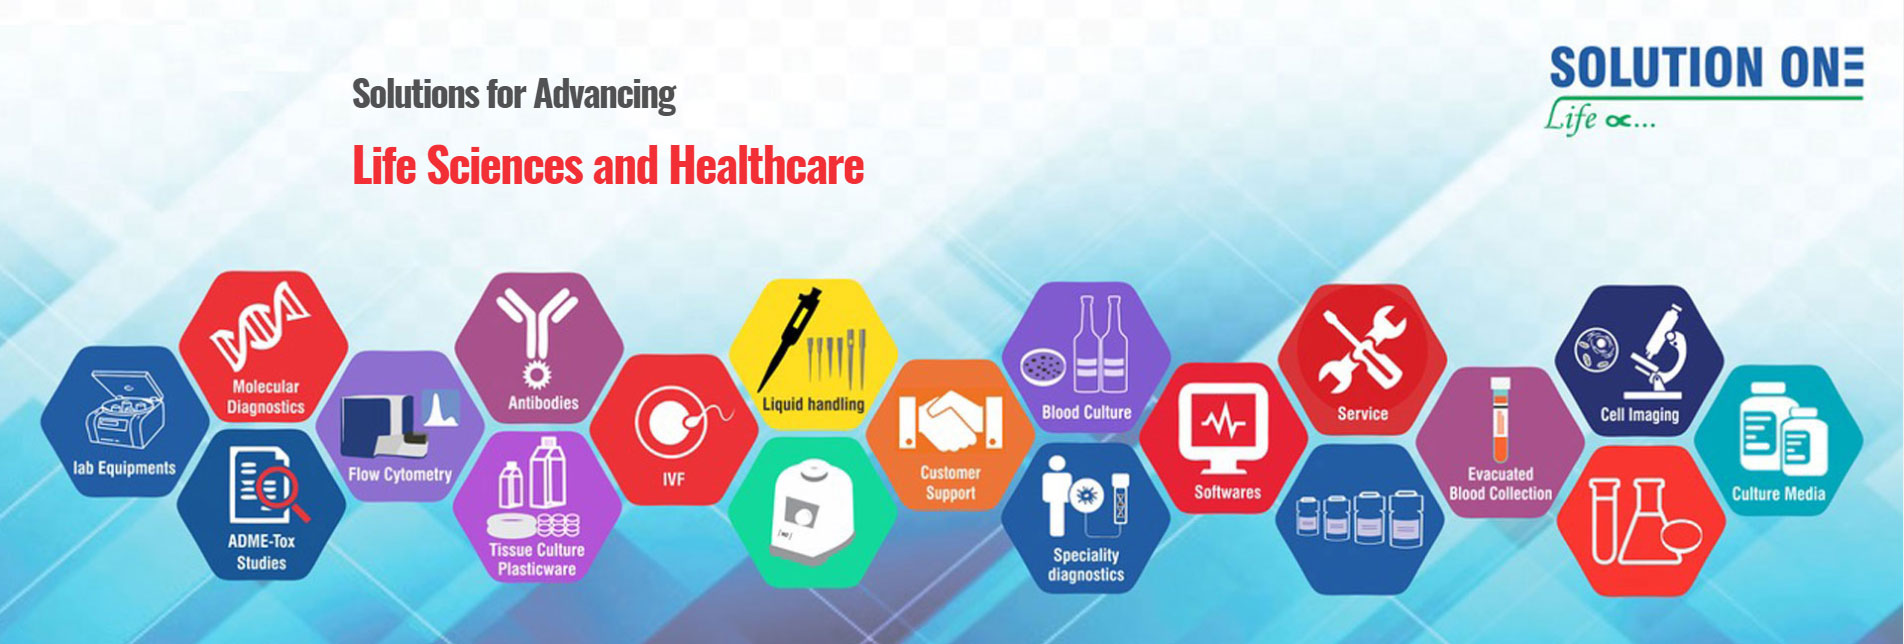 Solutions for Advancing Life Sciences & Healthcare